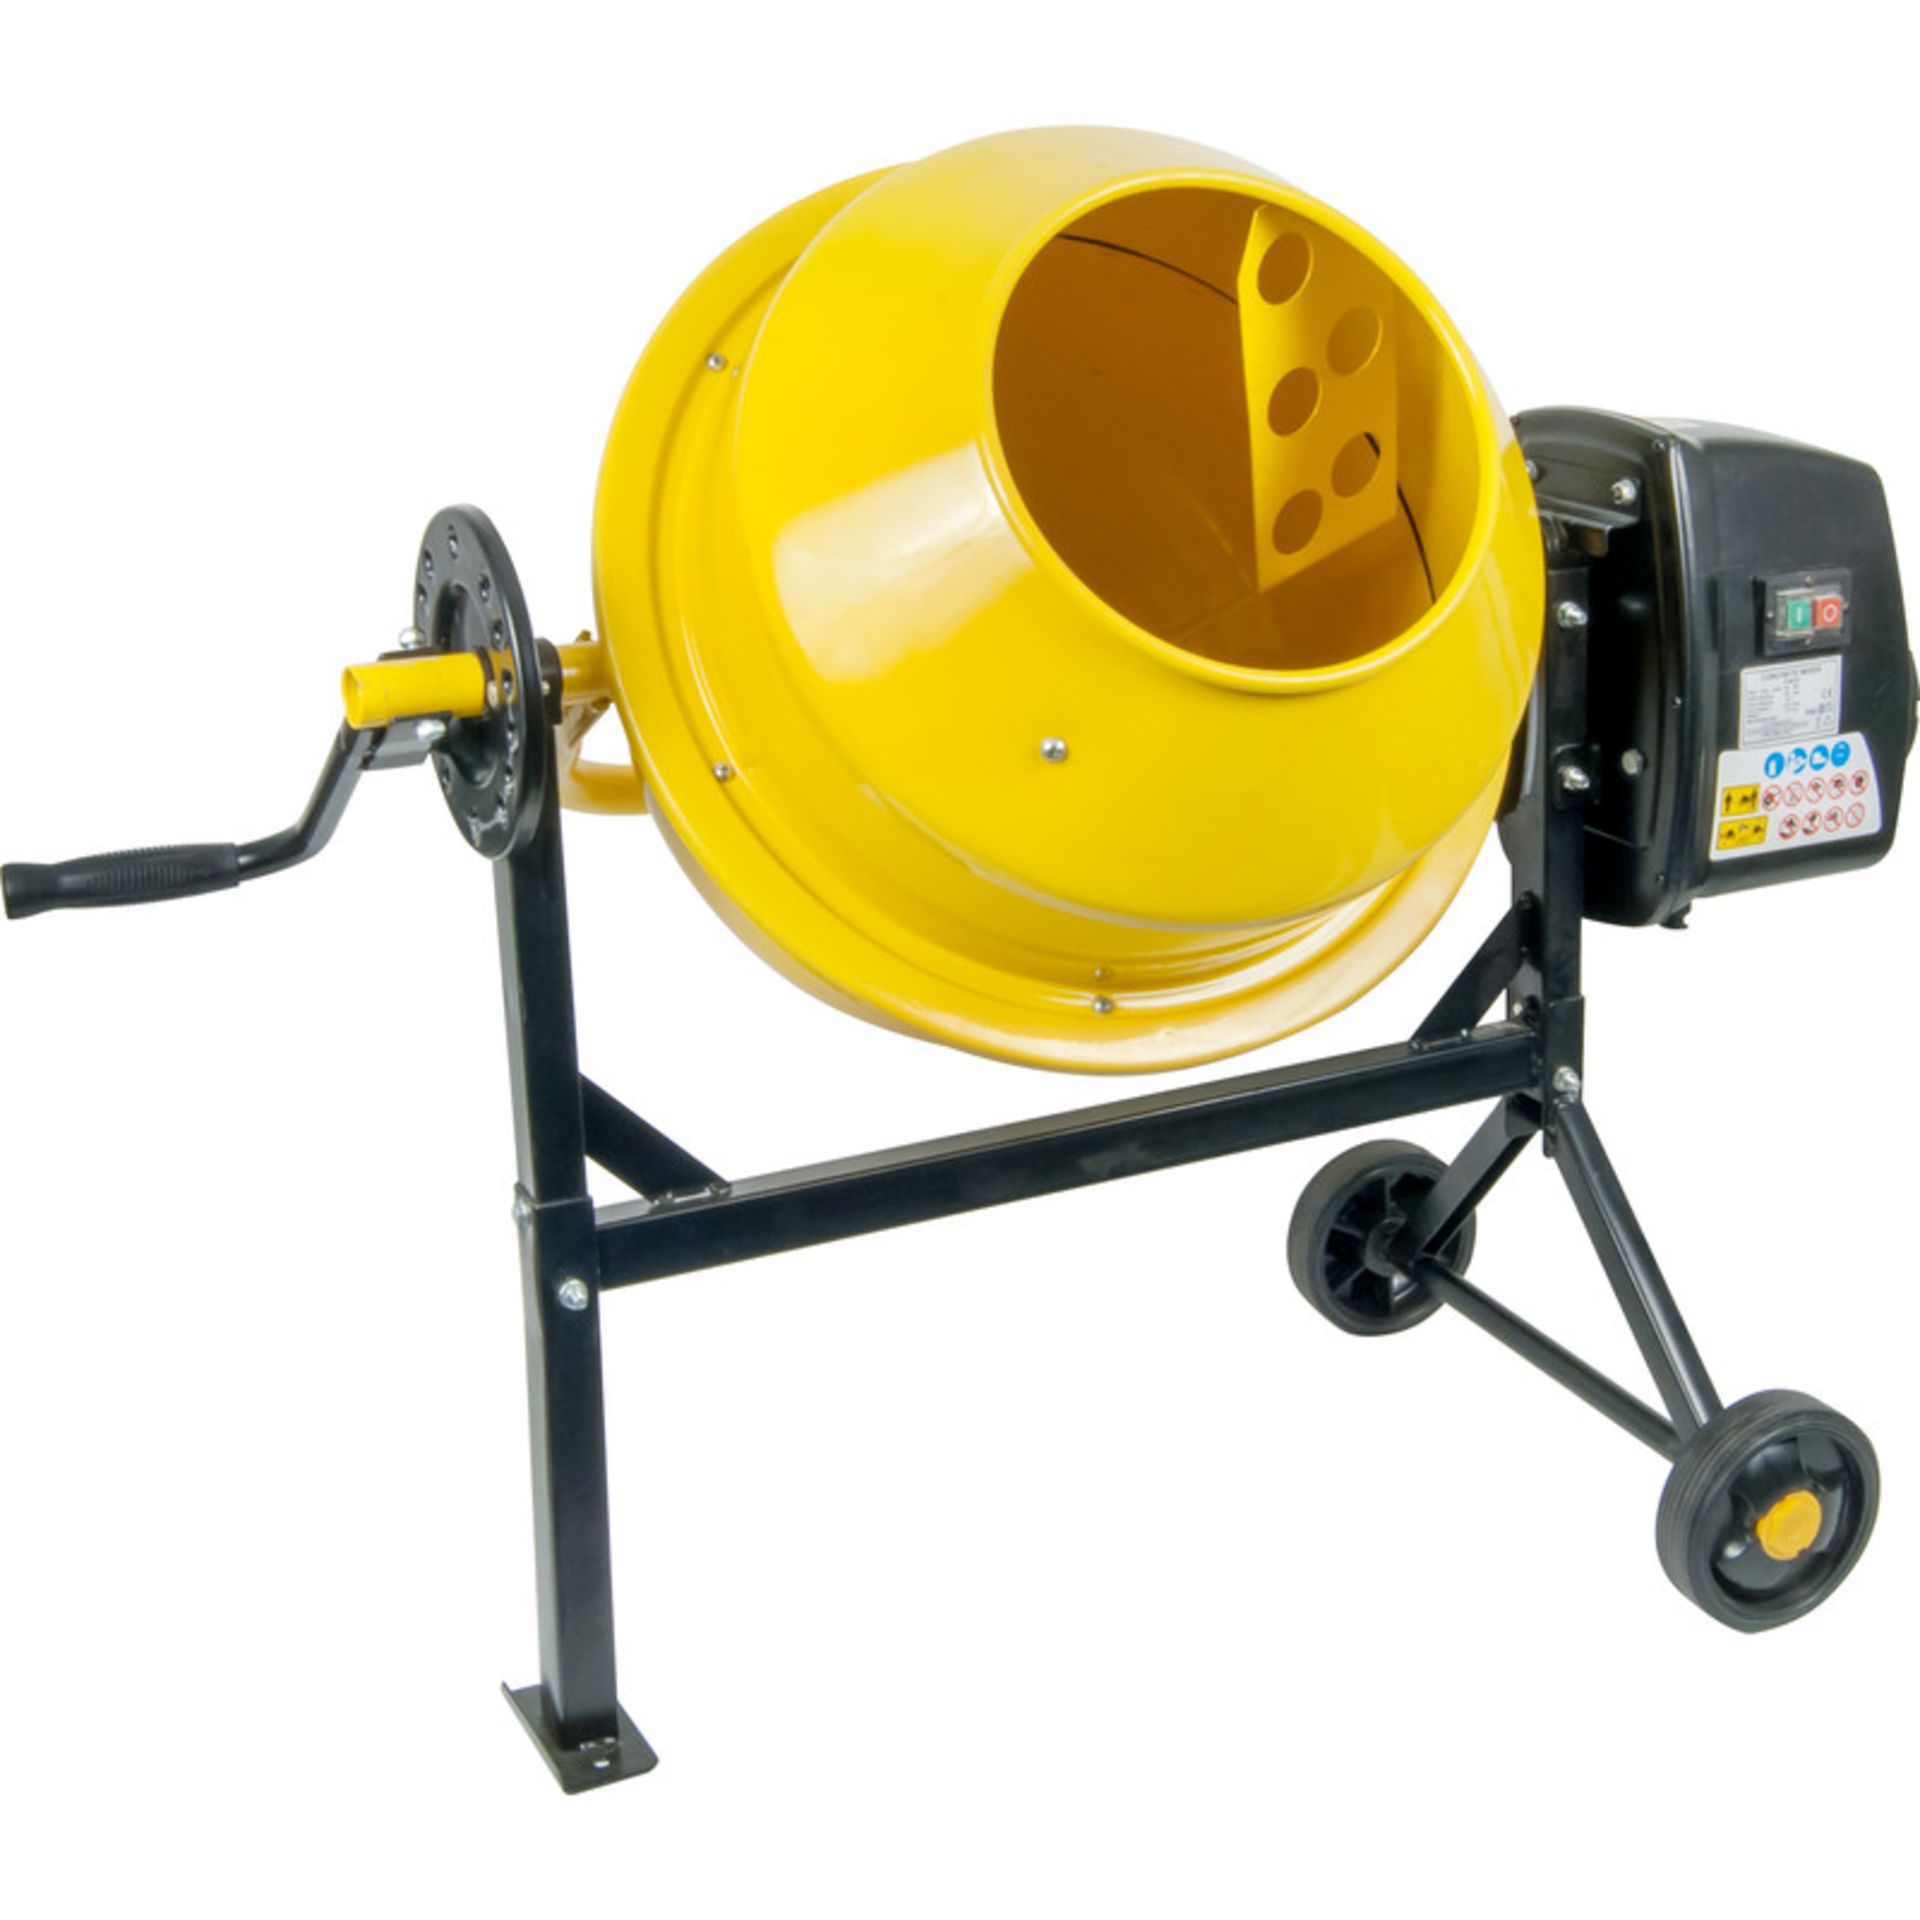 V Brand New Sip Cement Mixer 63litre, Mouth 236mm, Weight 27kg RRP169.97 Colour May Vary